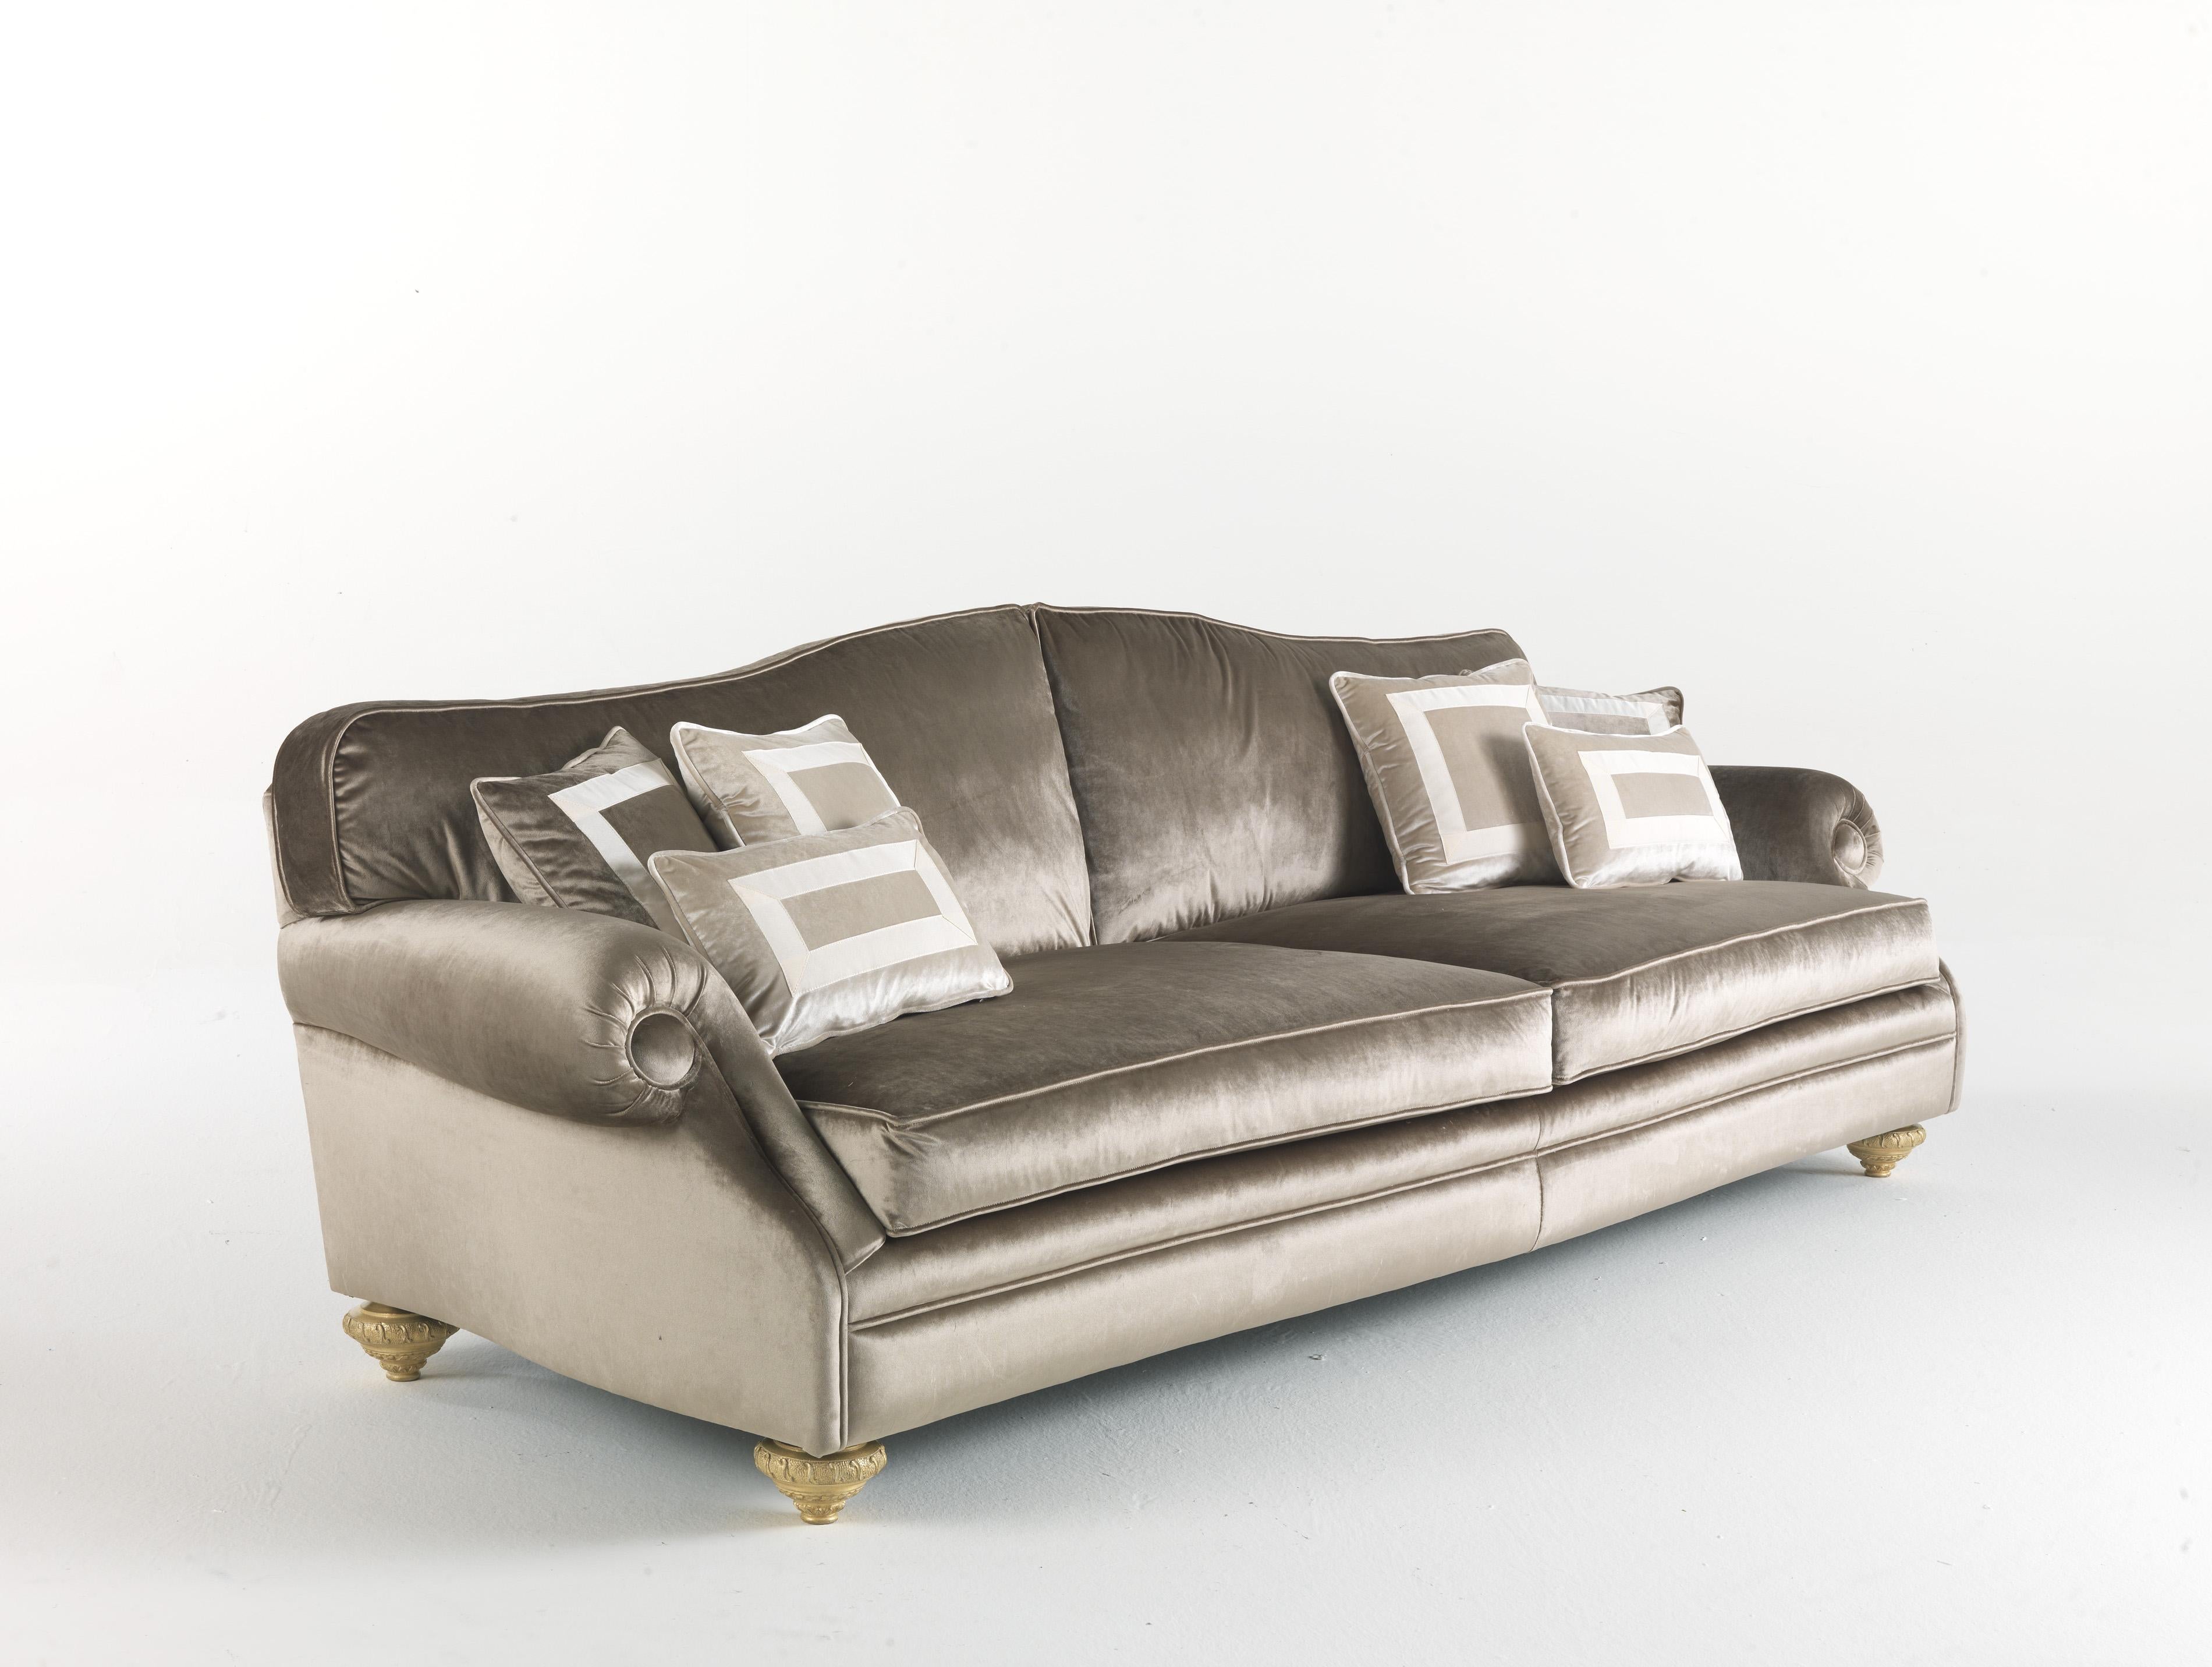 Totally upholstered and particularly comfortable, armchairs and sofas from the Beluga line are characterized by soft and welcoming shapes. The elegance of the lines is enhanced by the upholstery in velvets, silks and fabrics from the